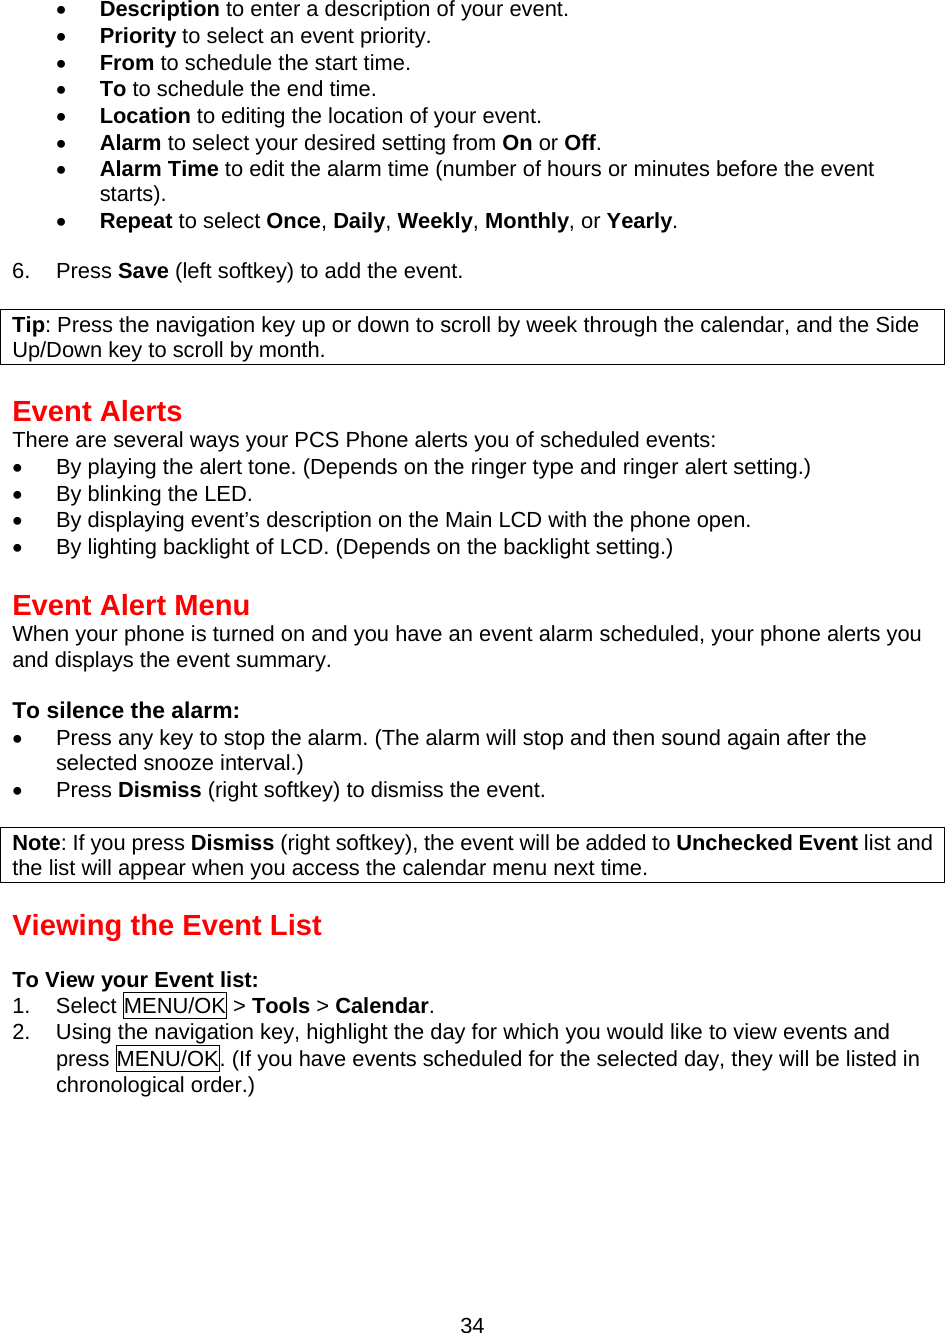  •  Description to enter a description of your event. •  Priority to select an event priority. •  From to schedule the start time. •  To to schedule the end time. •  Location to editing the location of your event. •  Alarm to select your desired setting from On or Off. •  Alarm Time to edit the alarm time (number of hours or minutes before the event starts). •  Repeat to select Once, Daily, Weekly, Monthly, or Yearly.  6. Press Save (left softkey) to add the event.  Tip: Press the navigation key up or down to scroll by week through the calendar, and the Side Up/Down key to scroll by month.  Event Alerts There are several ways your PCS Phone alerts you of scheduled events: •  By playing the alert tone. (Depends on the ringer type and ringer alert setting.) •  By blinking the LED. •  By displaying event’s description on the Main LCD with the phone open. •  By lighting backlight of LCD. (Depends on the backlight setting.)  Event Alert Menu When your phone is turned on and you have an event alarm scheduled, your phone alerts you and displays the event summary.  To silence the alarm: •  Press any key to stop the alarm. (The alarm will stop and then sound again after the selected snooze interval.) •  Press Dismiss (right softkey) to dismiss the event.  Note: If you press Dismiss (right softkey), the event will be added to Unchecked Event list and the list will appear when you access the calendar menu next time.  Viewing the Event List  To View your Event list: 1. Select MENU/OK &gt; Tools &gt; Calendar. 2.  Using the navigation key, highlight the day for which you would like to view events and press MENU/OK. (If you have events scheduled for the selected day, they will be listed in chronological order.)  34